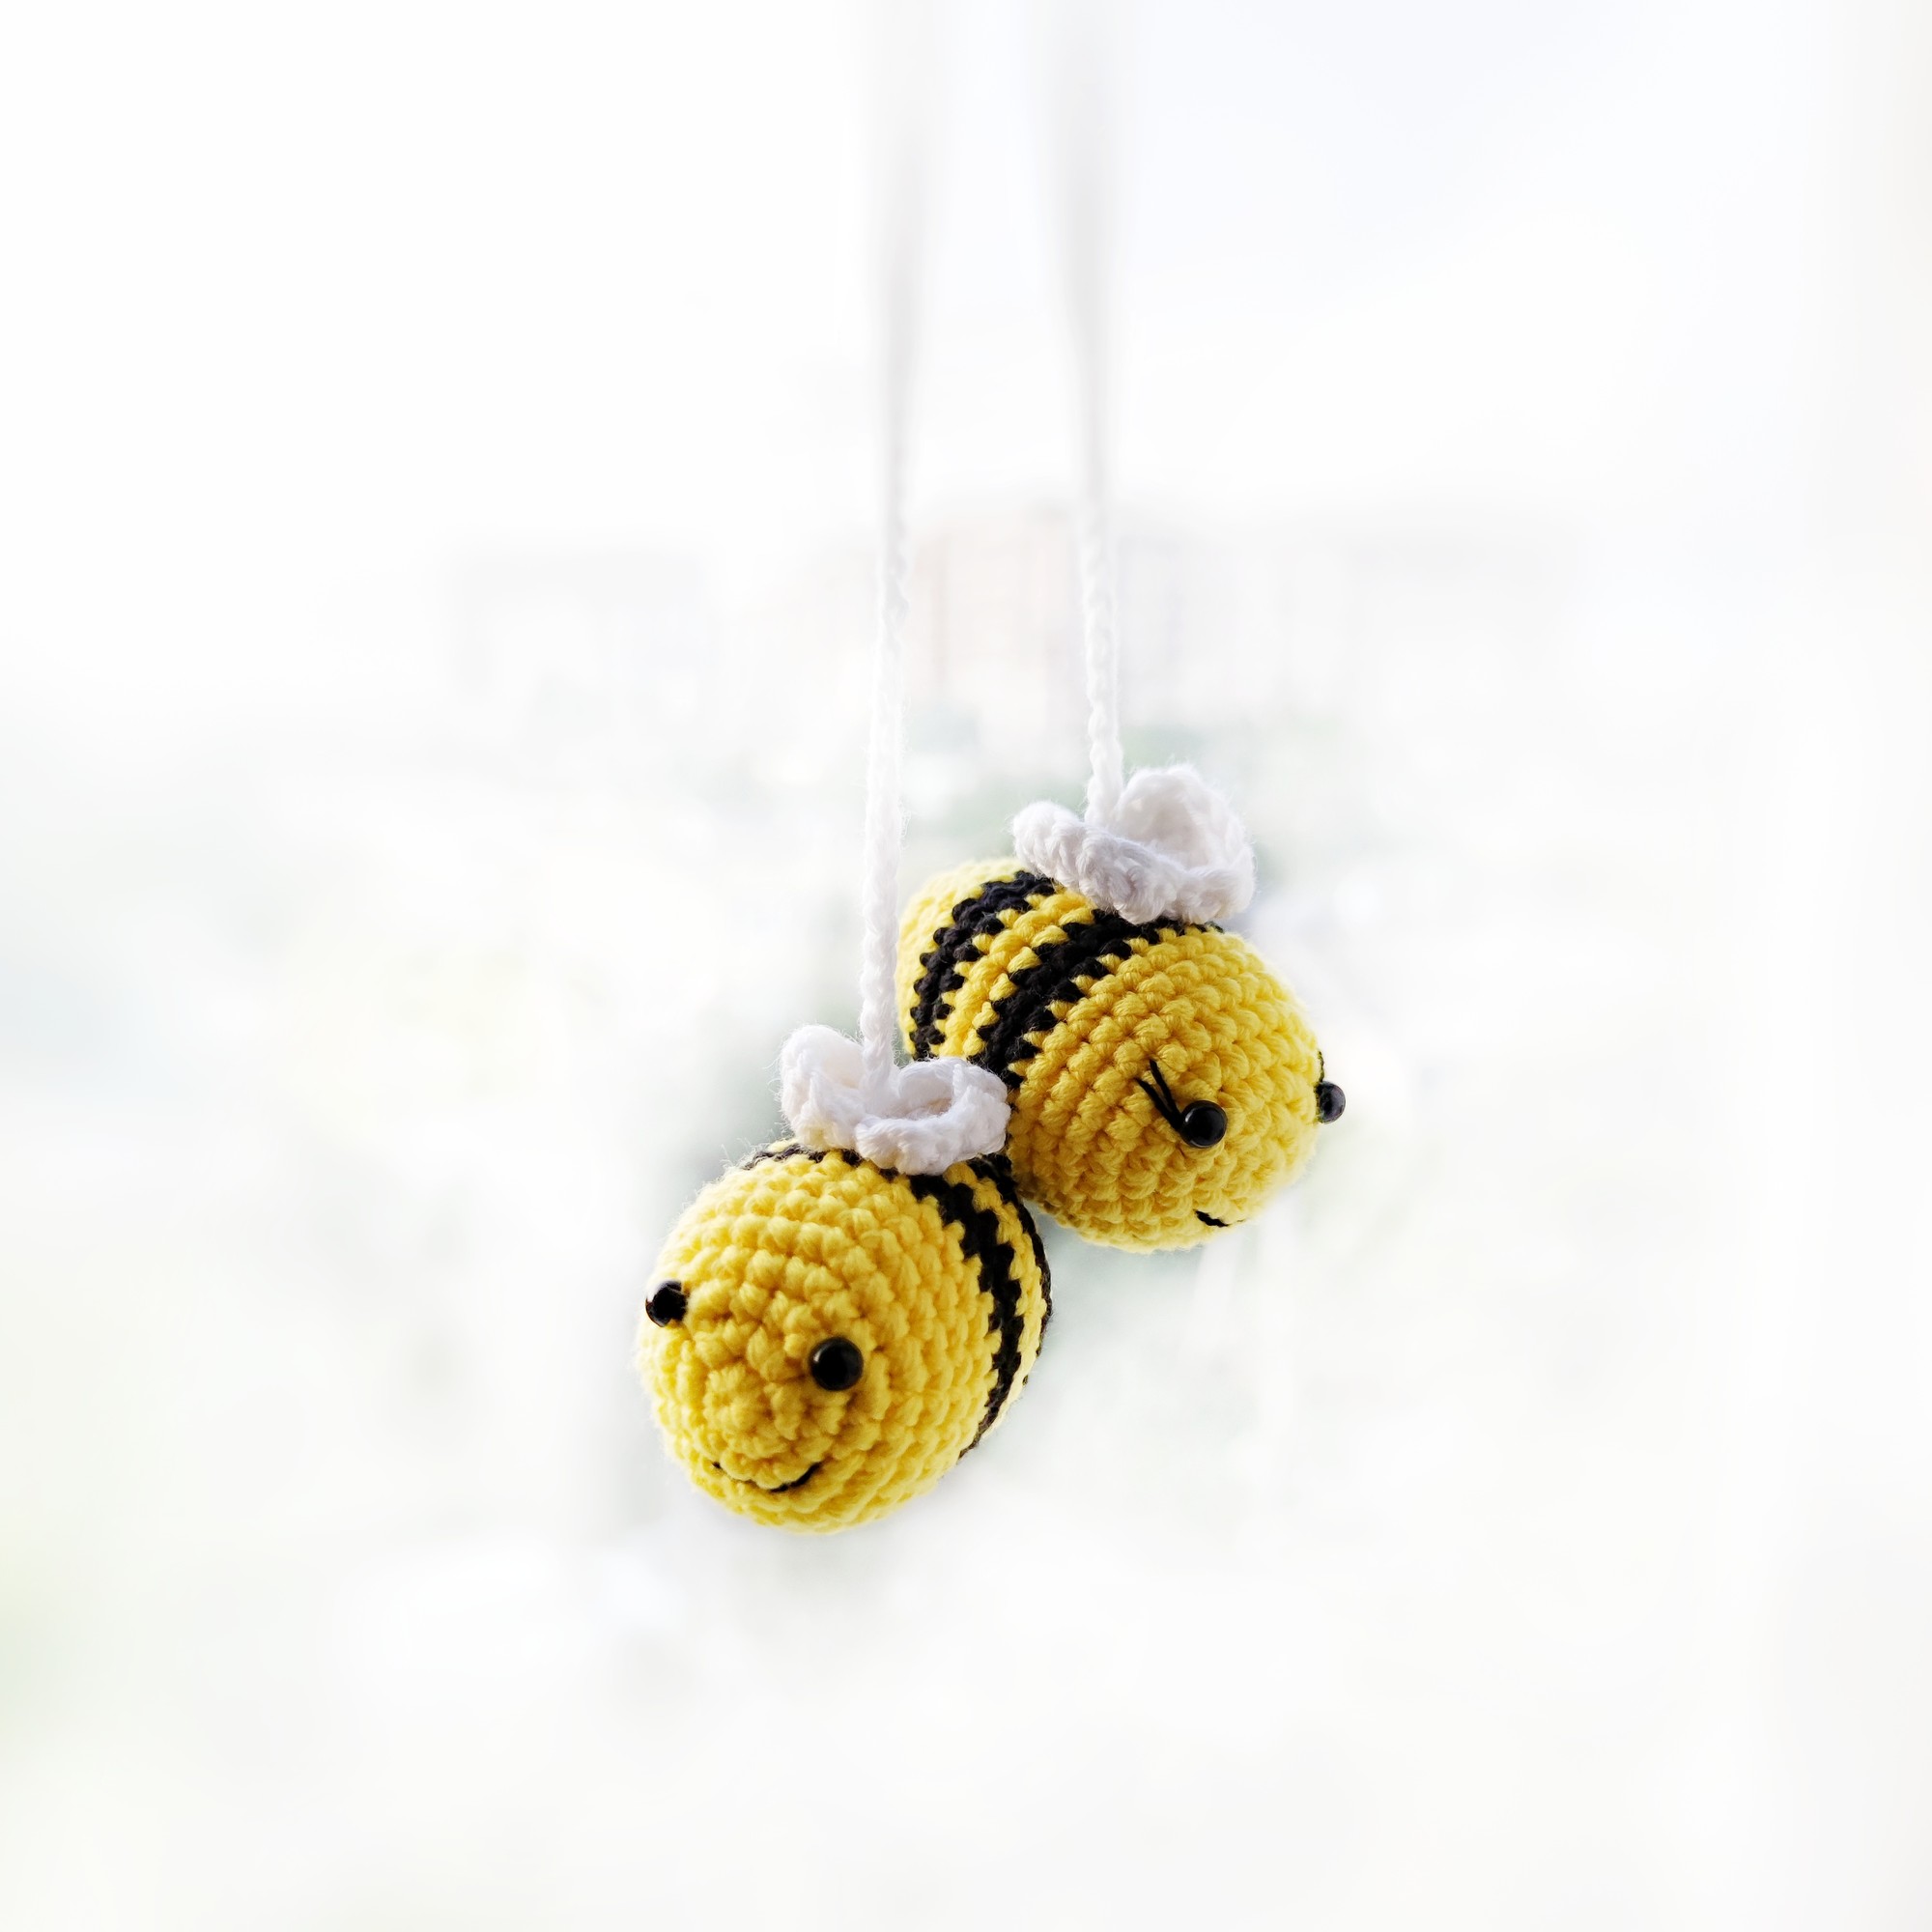 2 tiny bee car accessories , Crochet hanging decor, Rear view mirror accessories , Yellow car charm